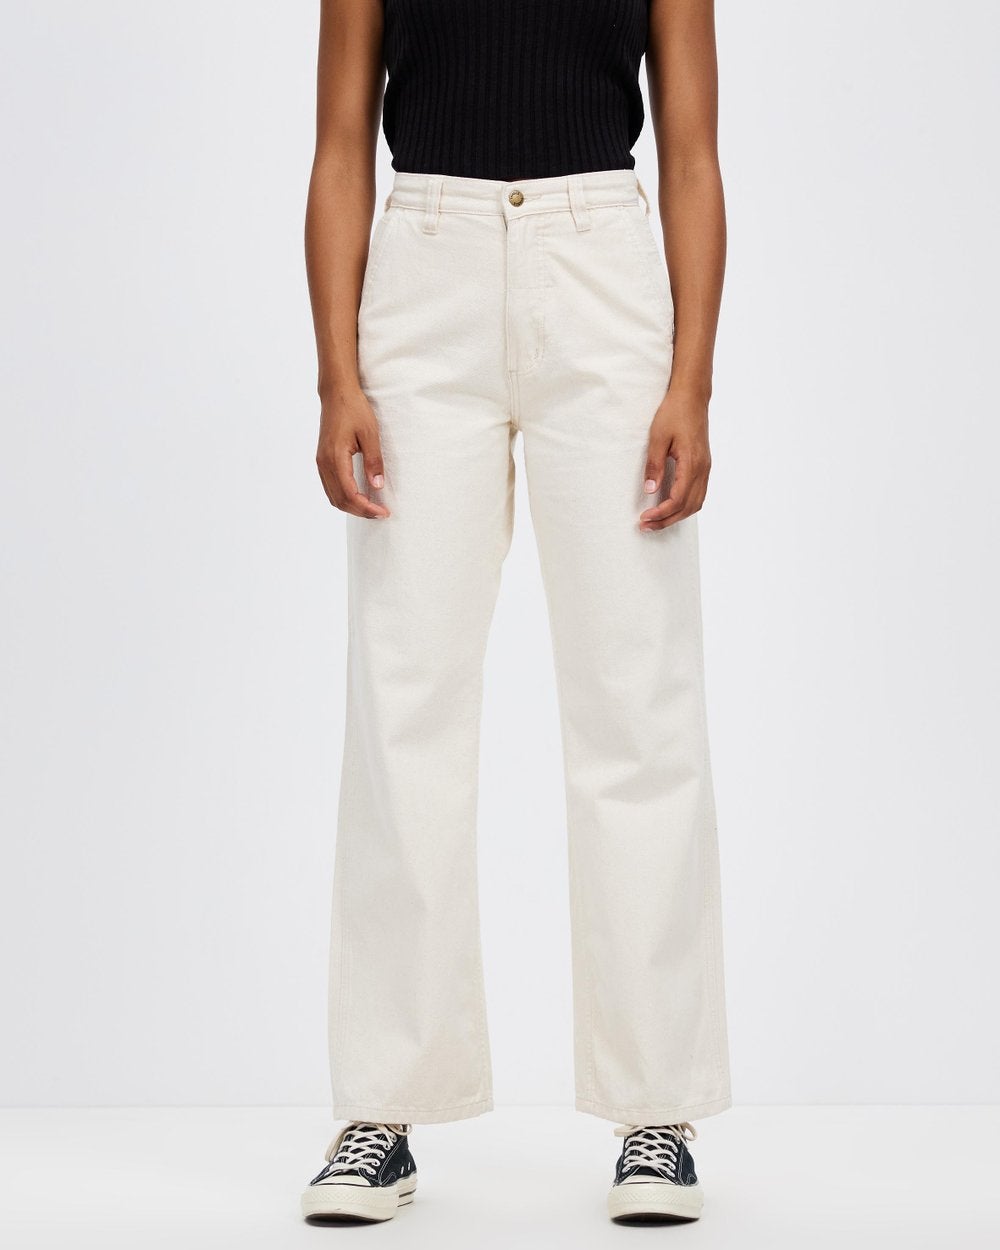 Thrills + Composure Pant Unbleached